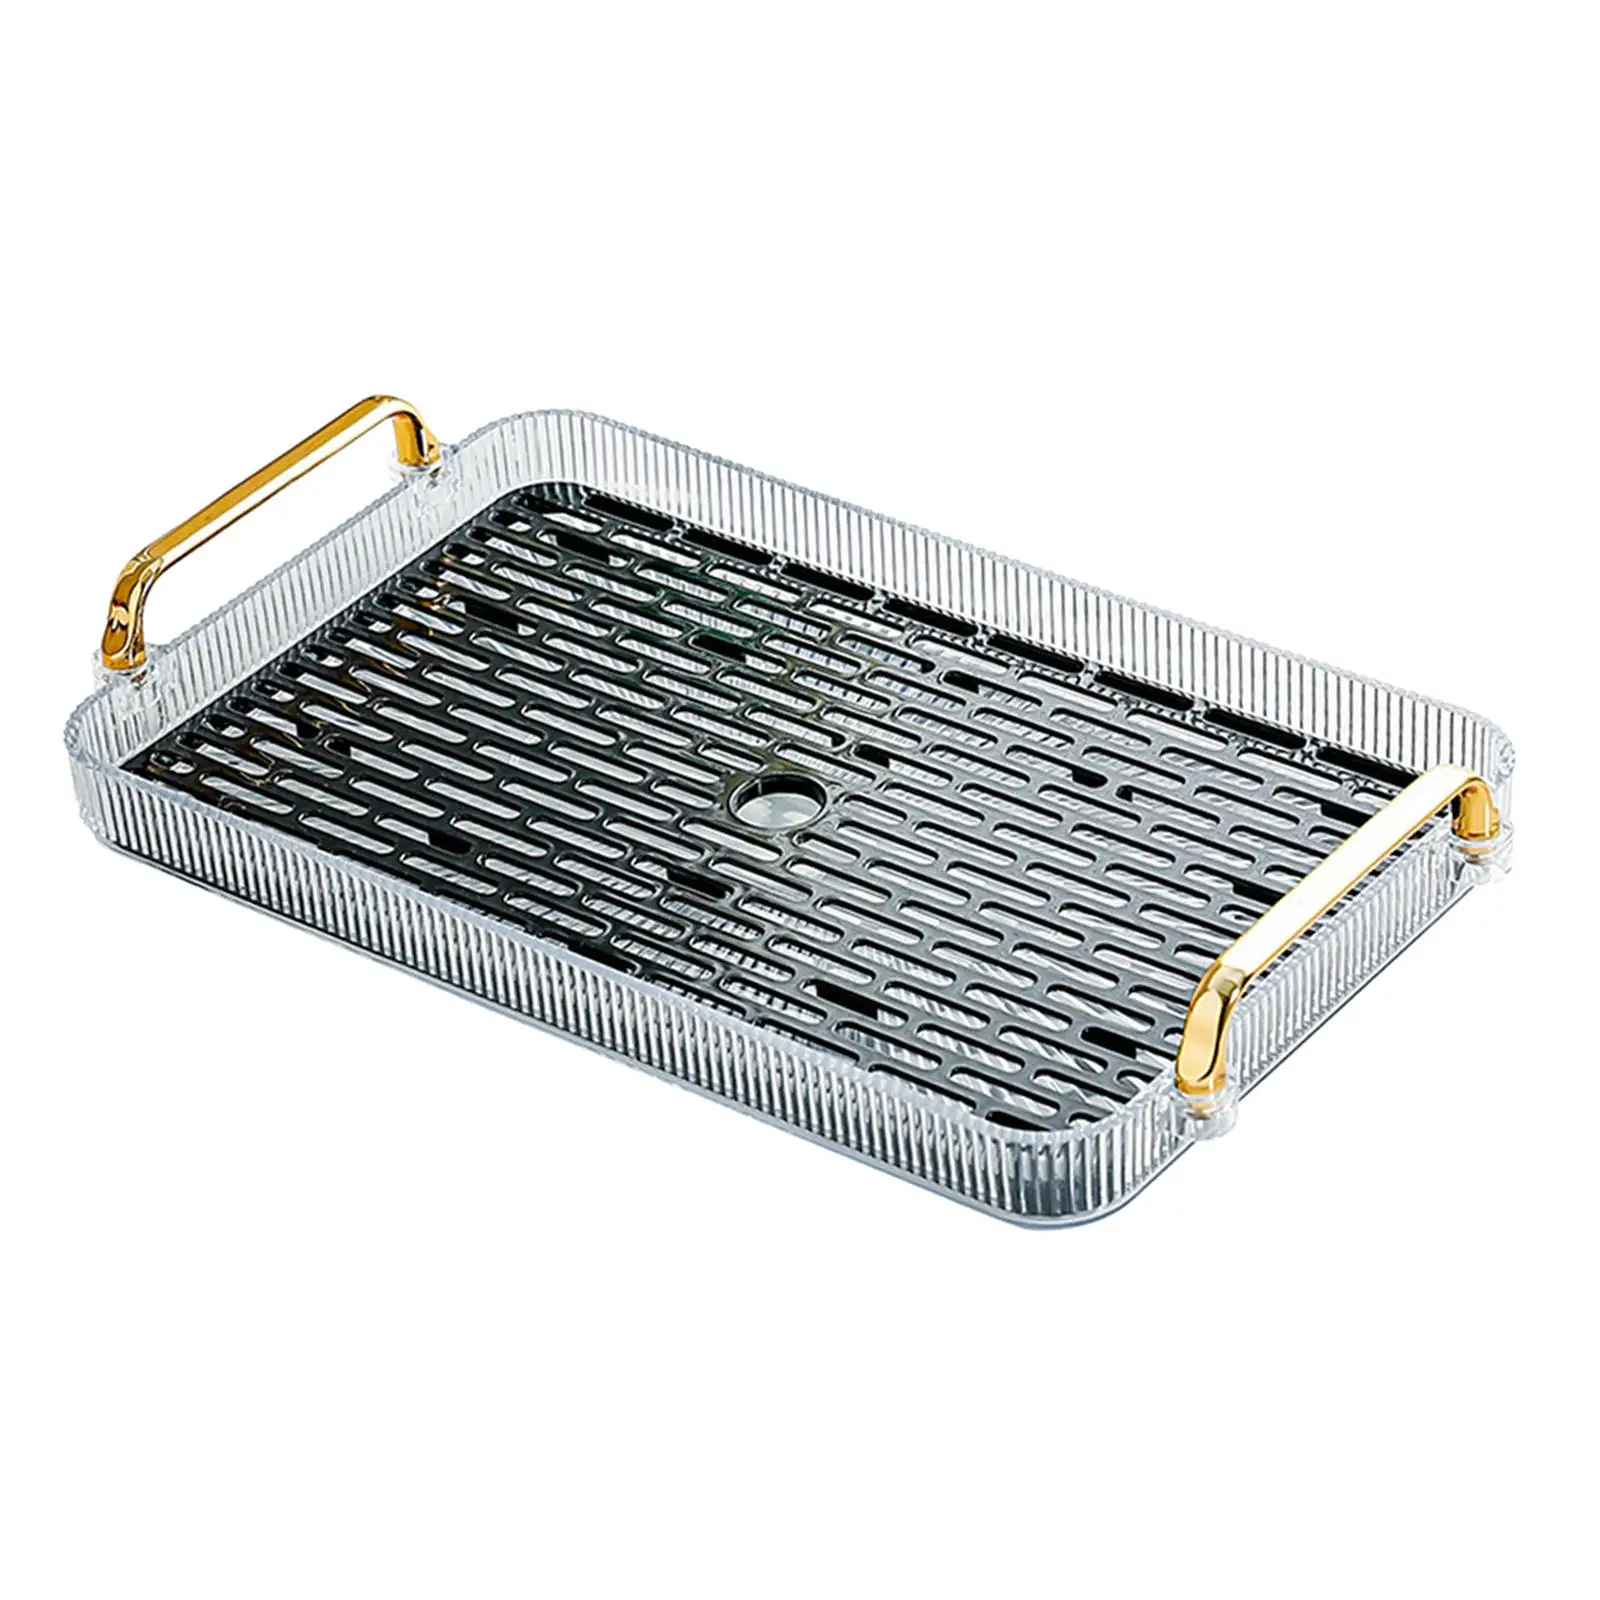 Drainage Serving Tray Lightweight Kitchen Storage Holder for Bedroom Office